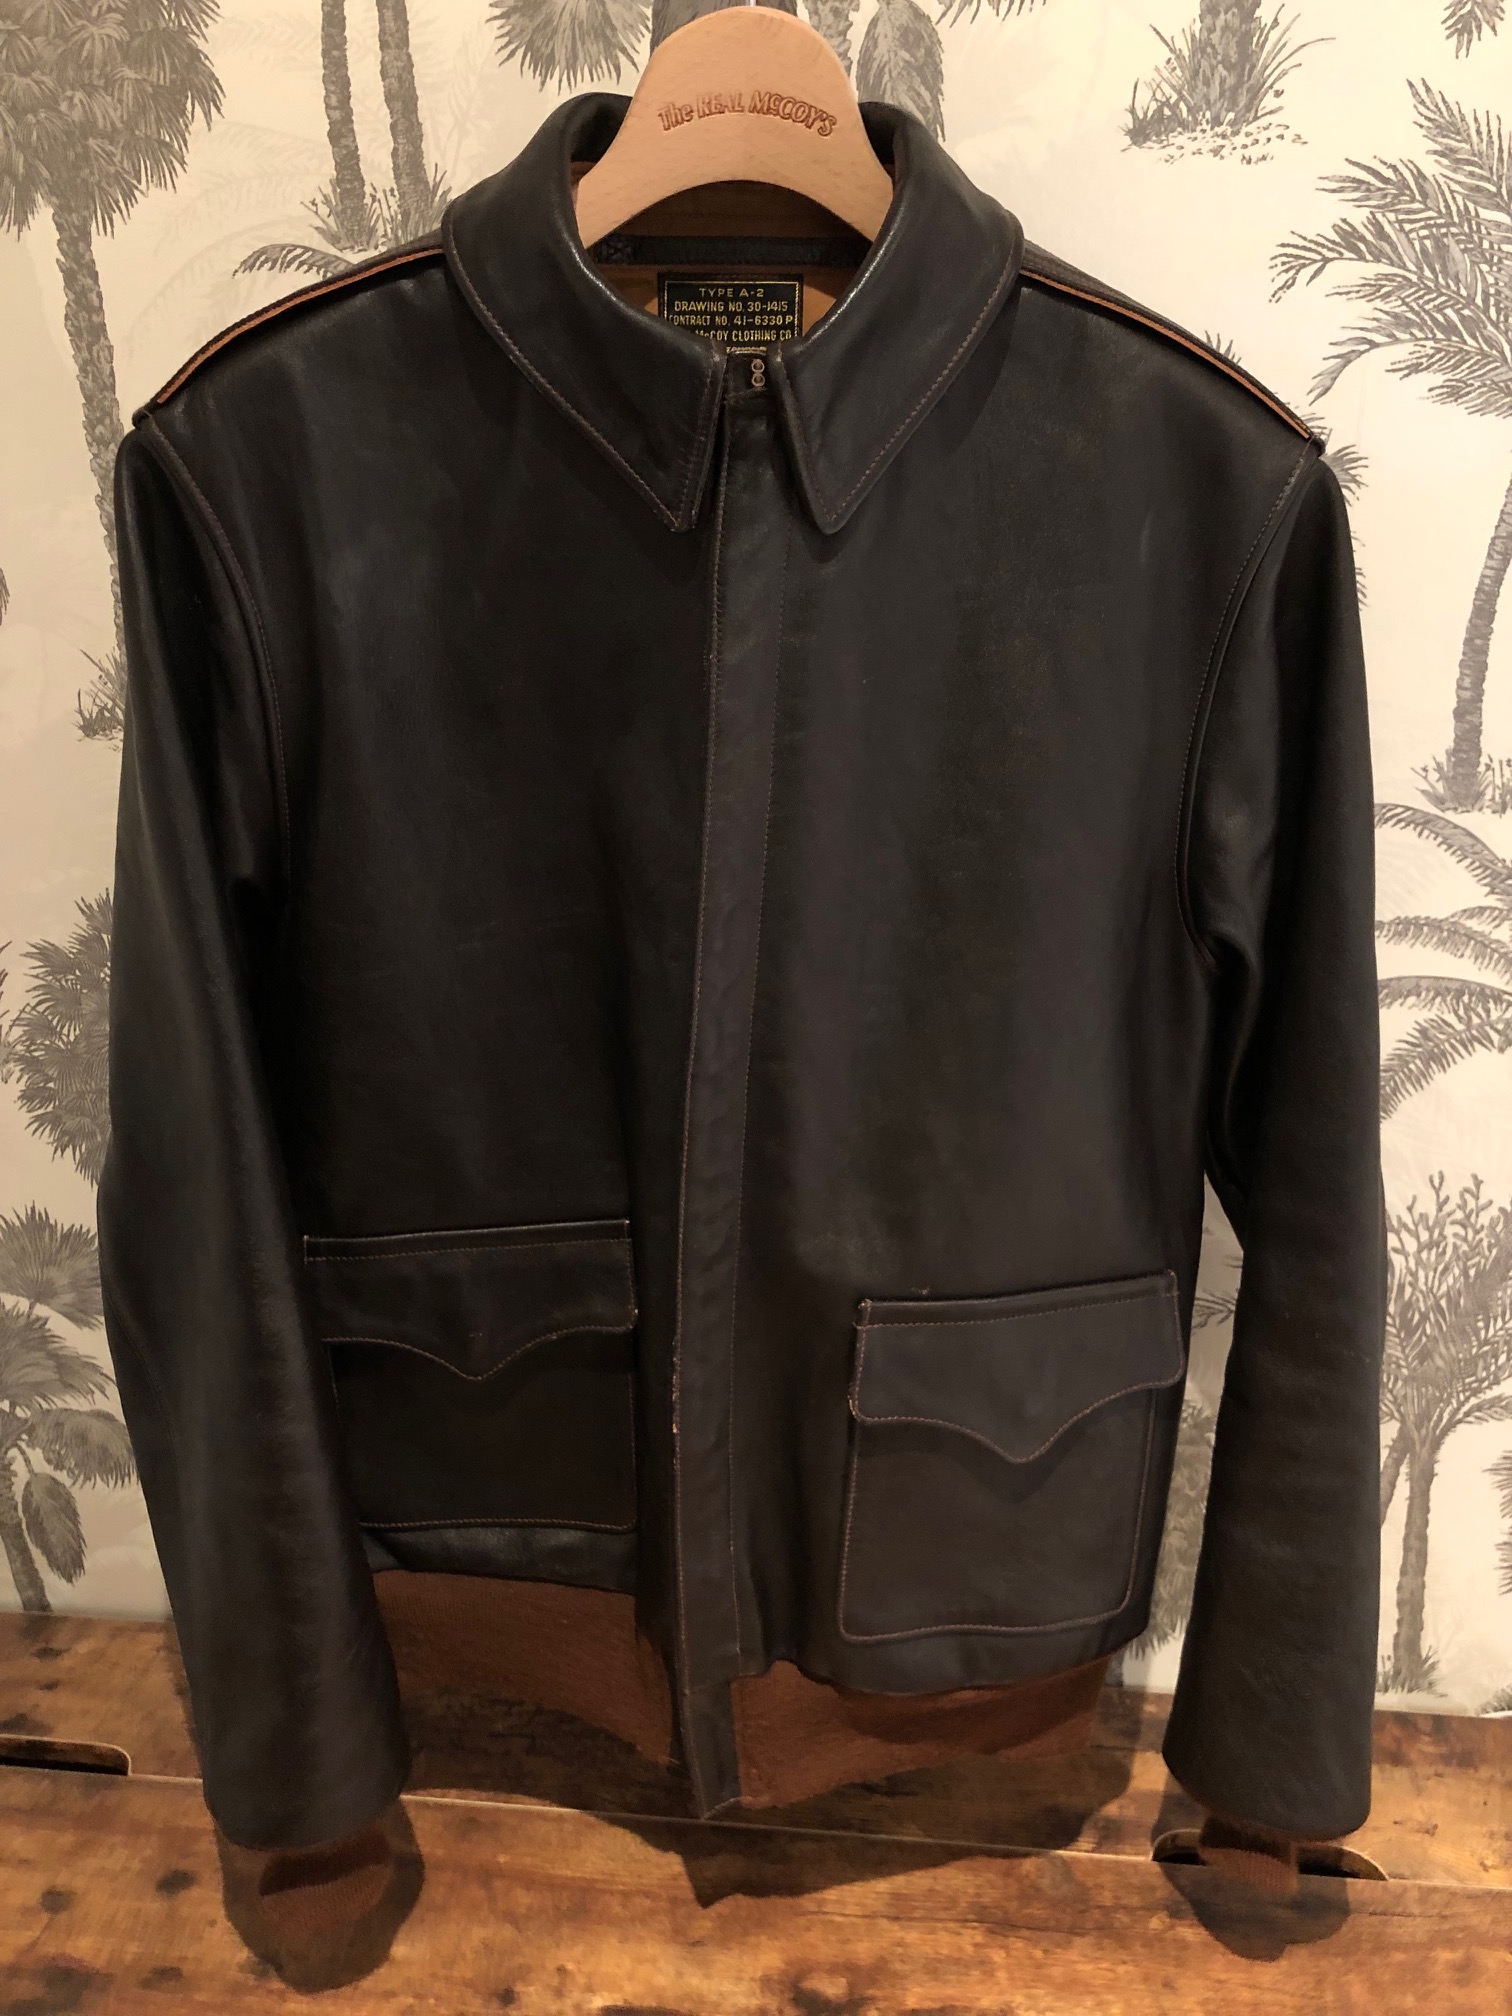 FS: The Real Mccoy's Type A-2 Real McCoy MFG CO Leather Jacket Size 42 ...